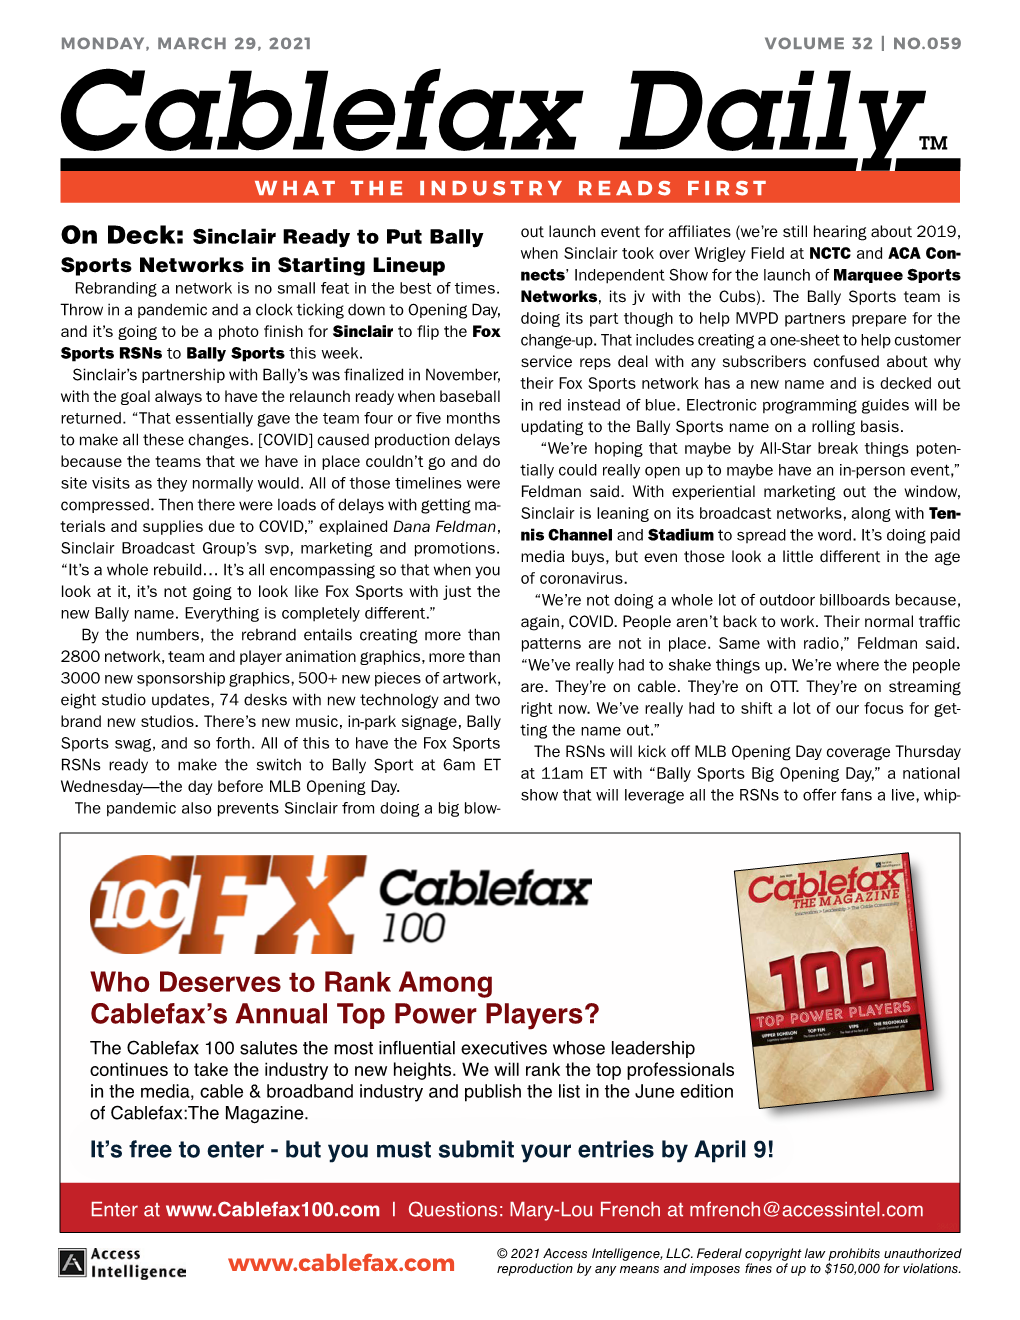 Cablefax Dailytm What the Industry Reads First